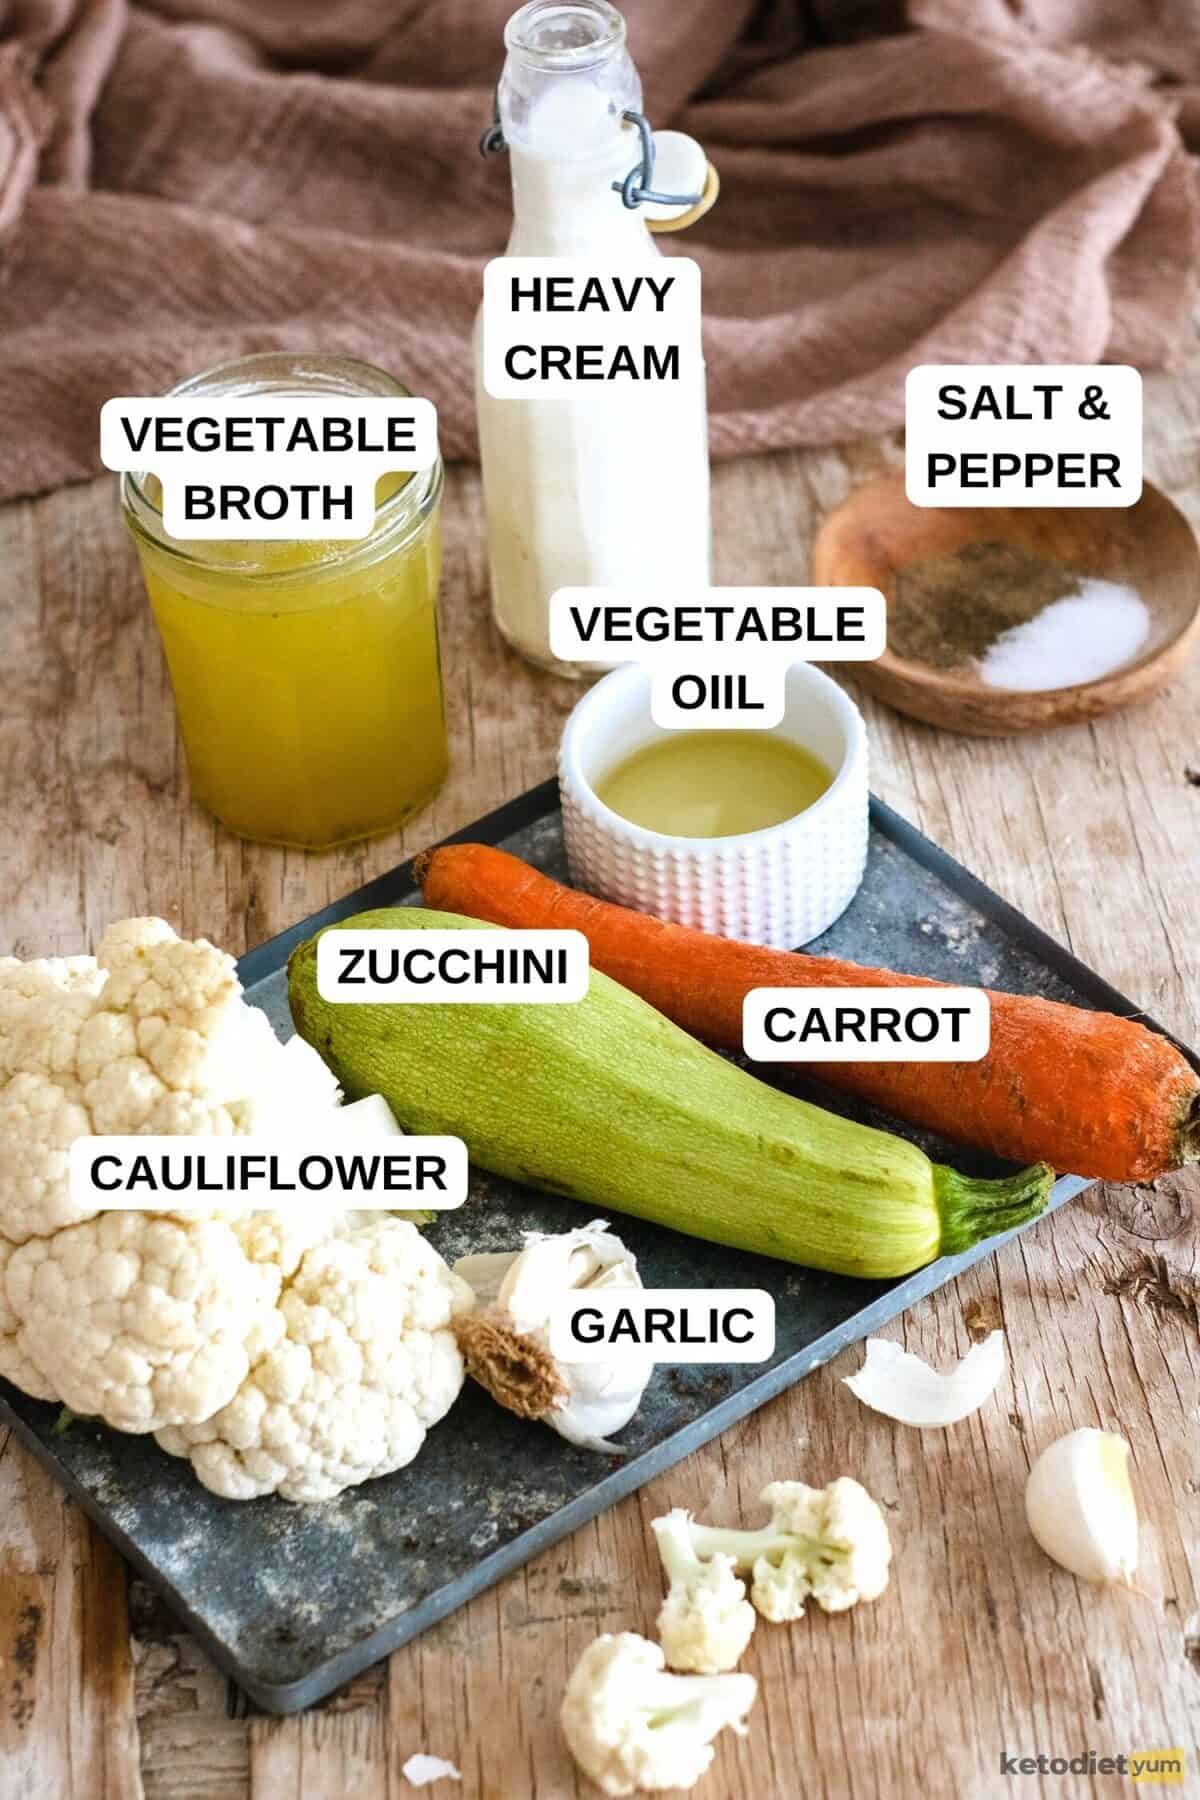 Oven tray with cauliflower, garlic, zucchini and carrot, with jars, bottles and bowls on a wooden table